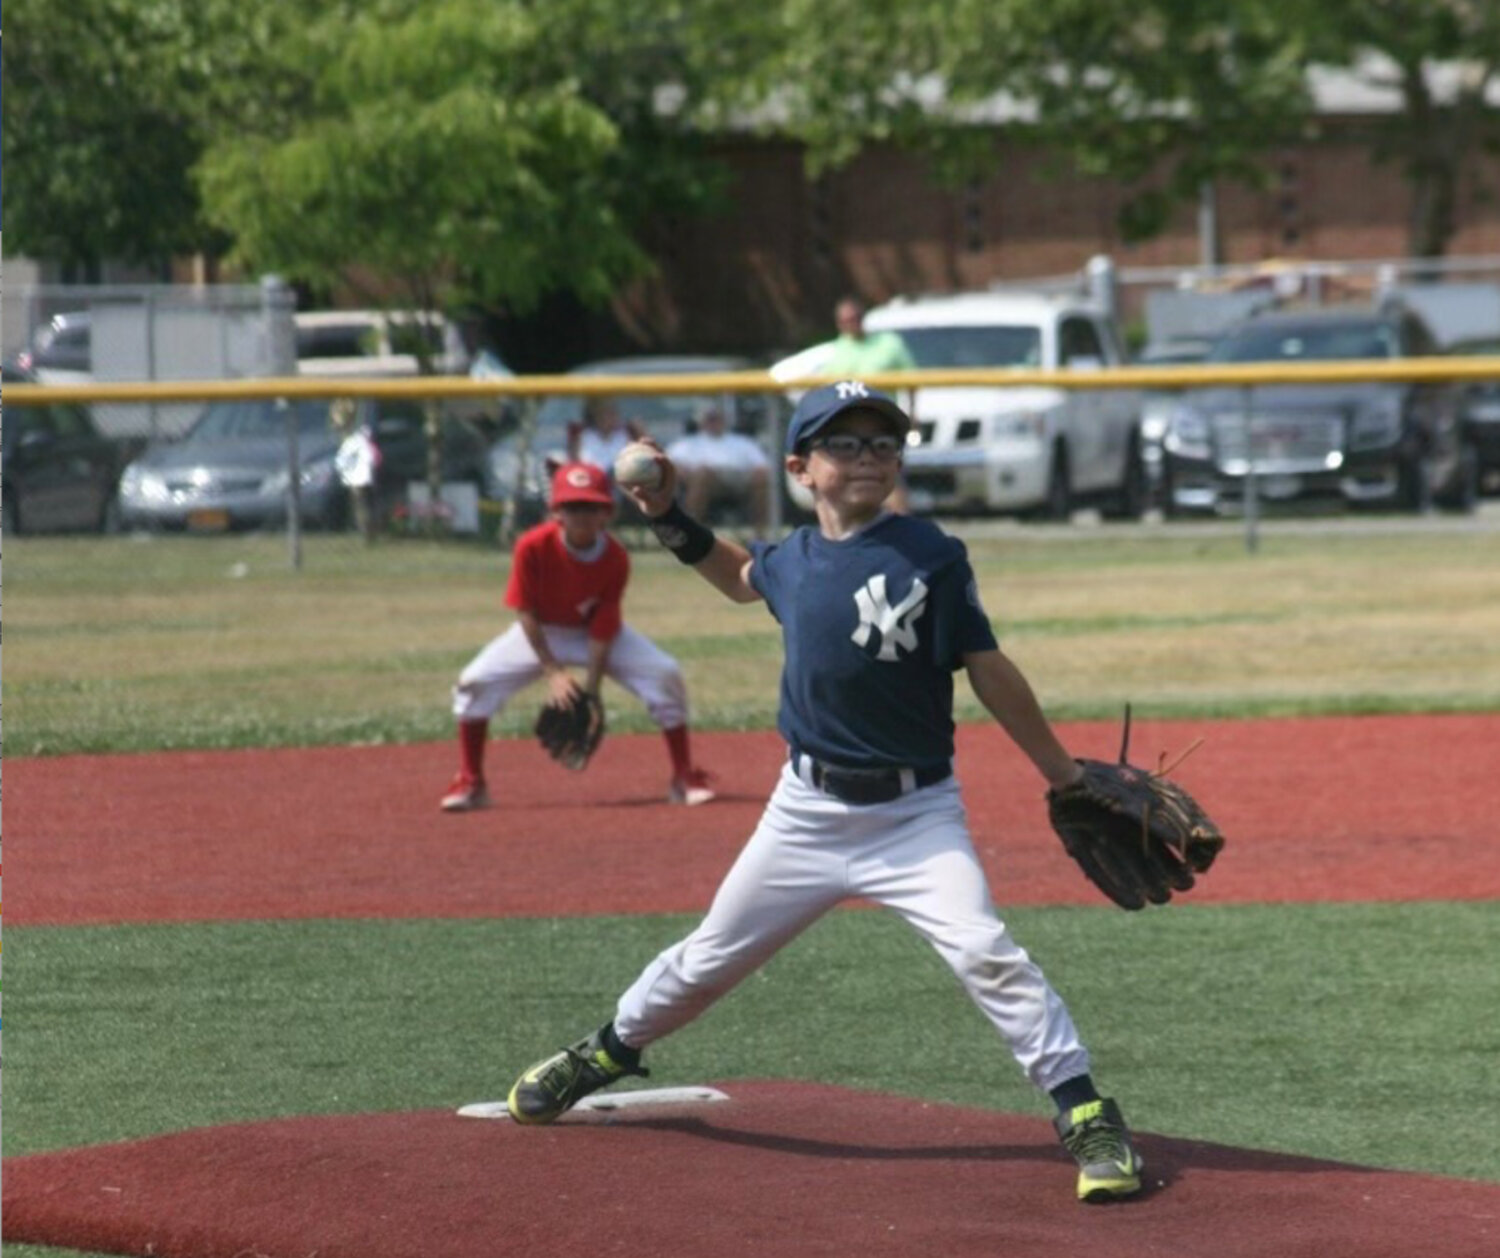 Dylan’s Dream Team Memorial Foundation, created in honor of Dylan Murphy, who died of cancer in 2018, is raising money to finance a new baseball field in his name. Above, Dylan pitching in a Little League game.